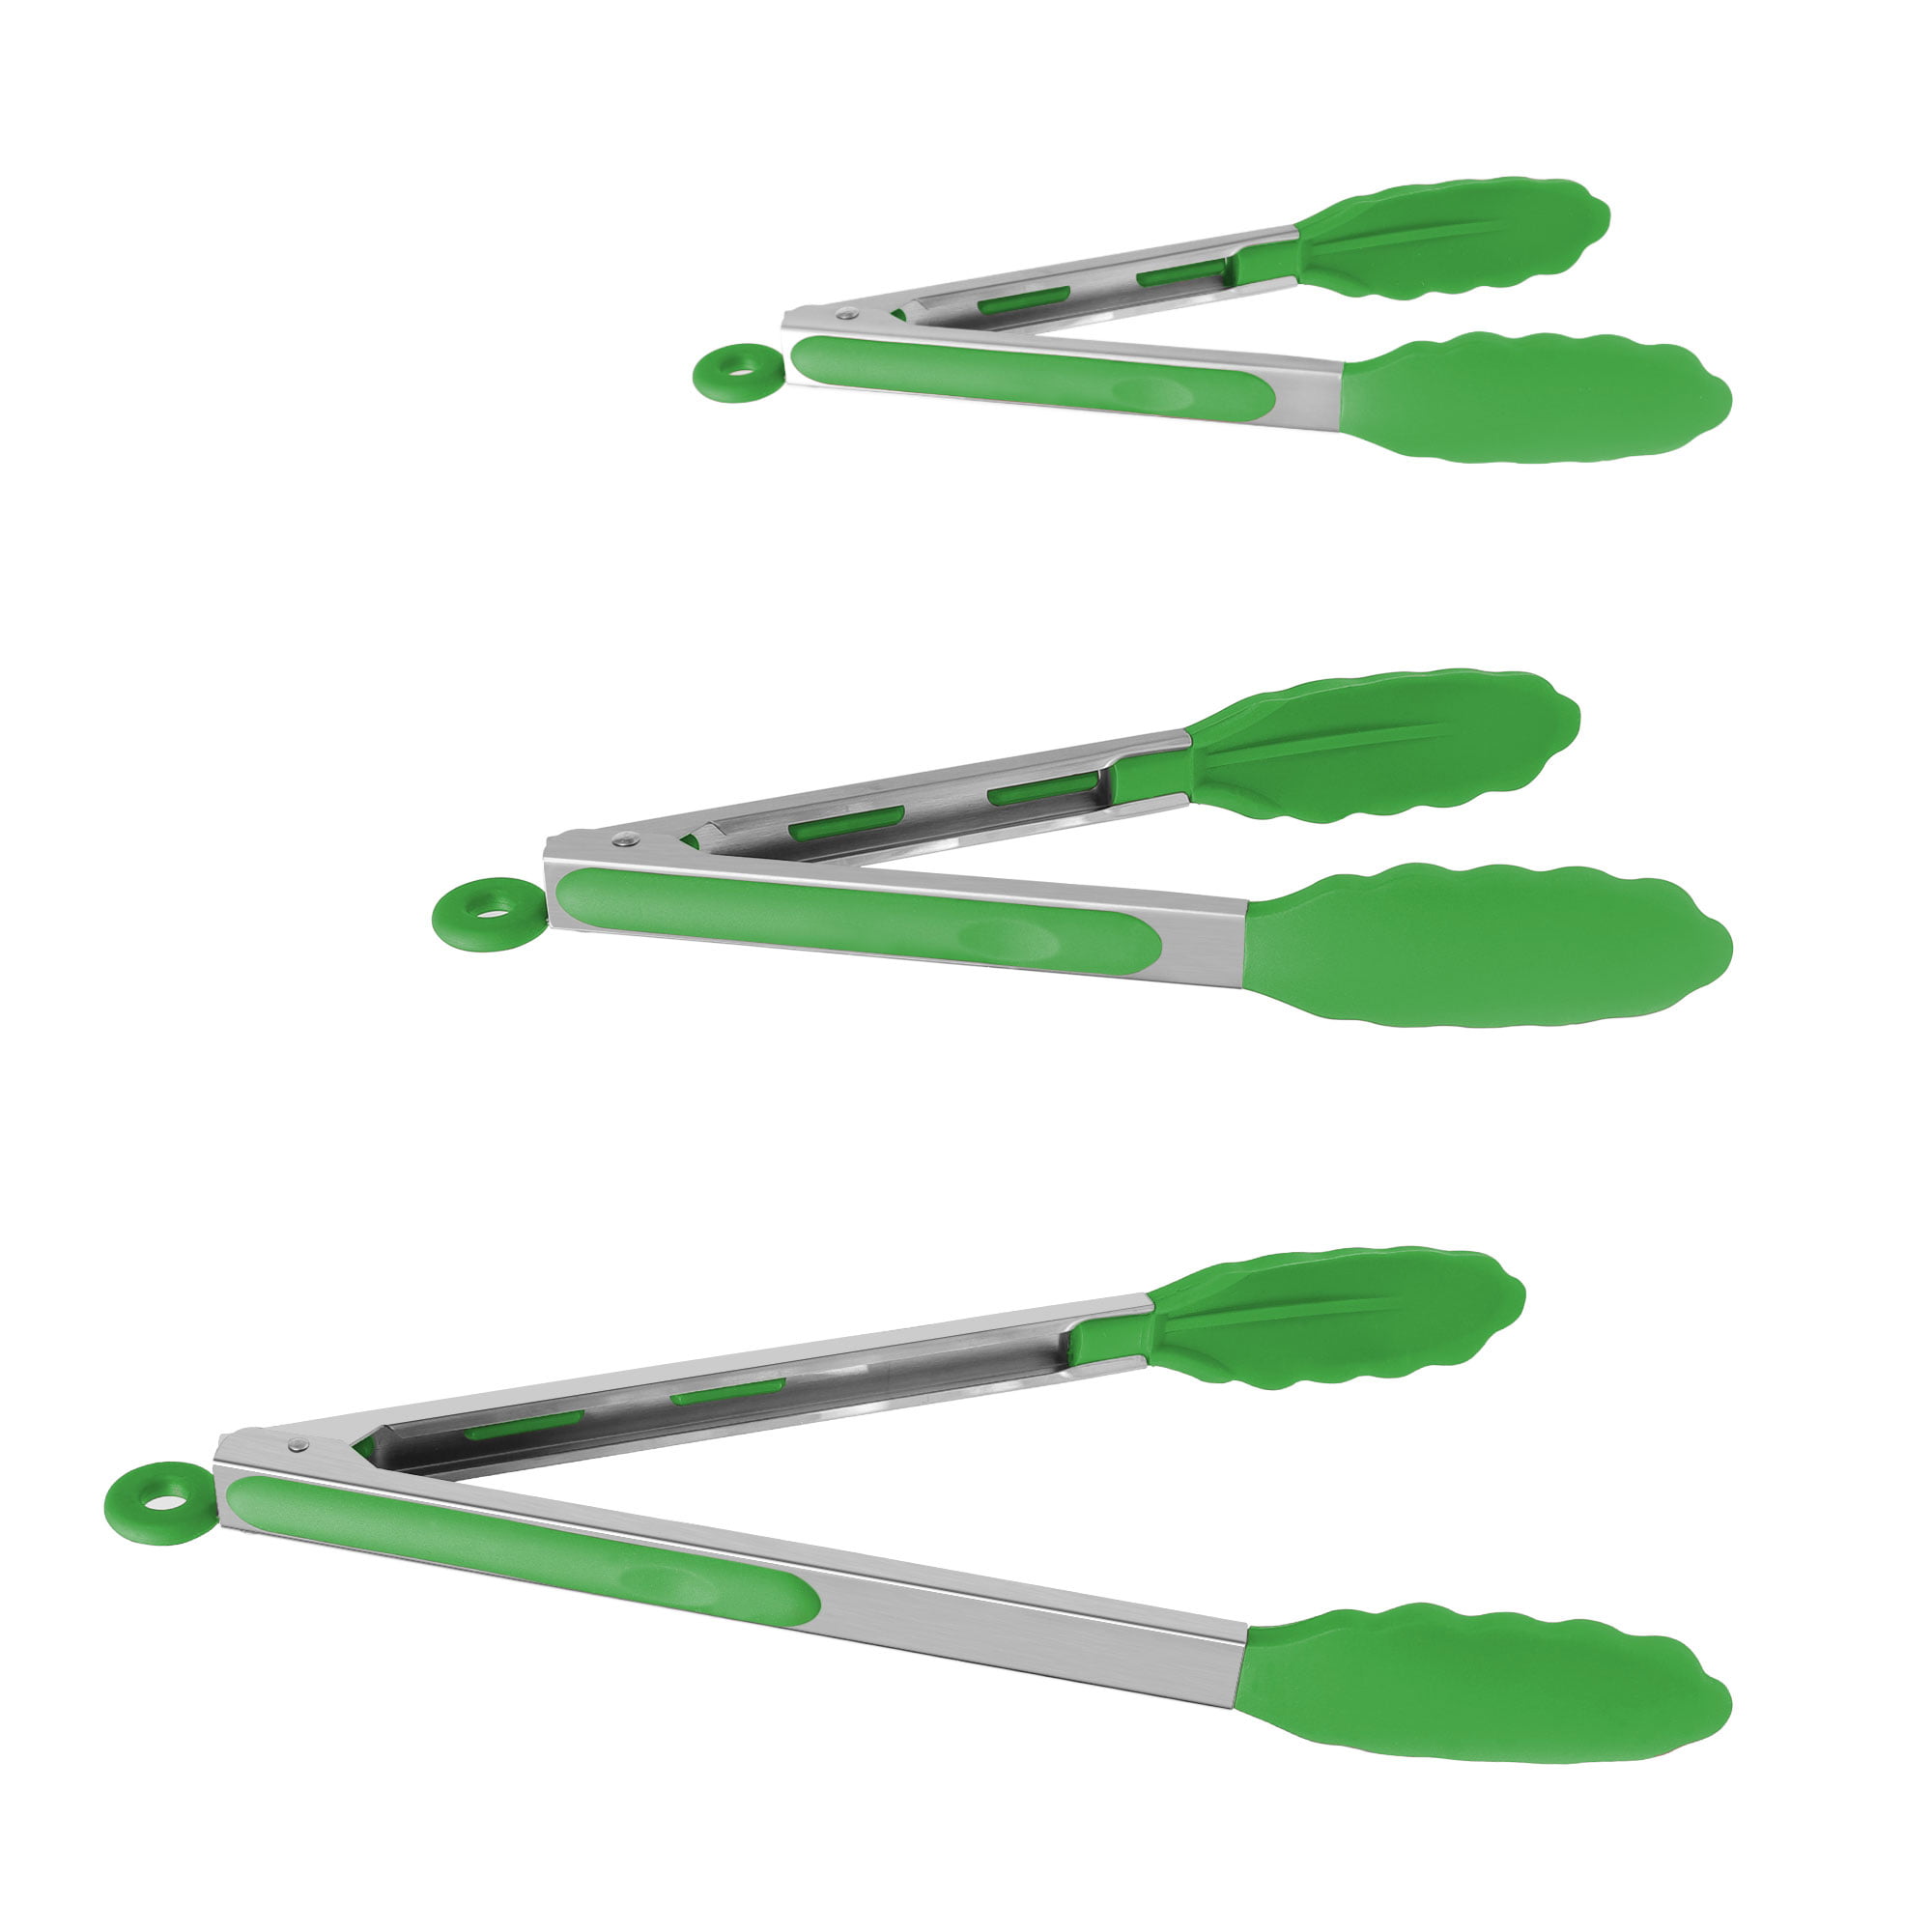 Airsmall Kitchen Tongs for Cooking, 9 inch Small Silicone Tongs, Food Grade Mini Serving Tongs with Silicone Tips, Set of 3, Green